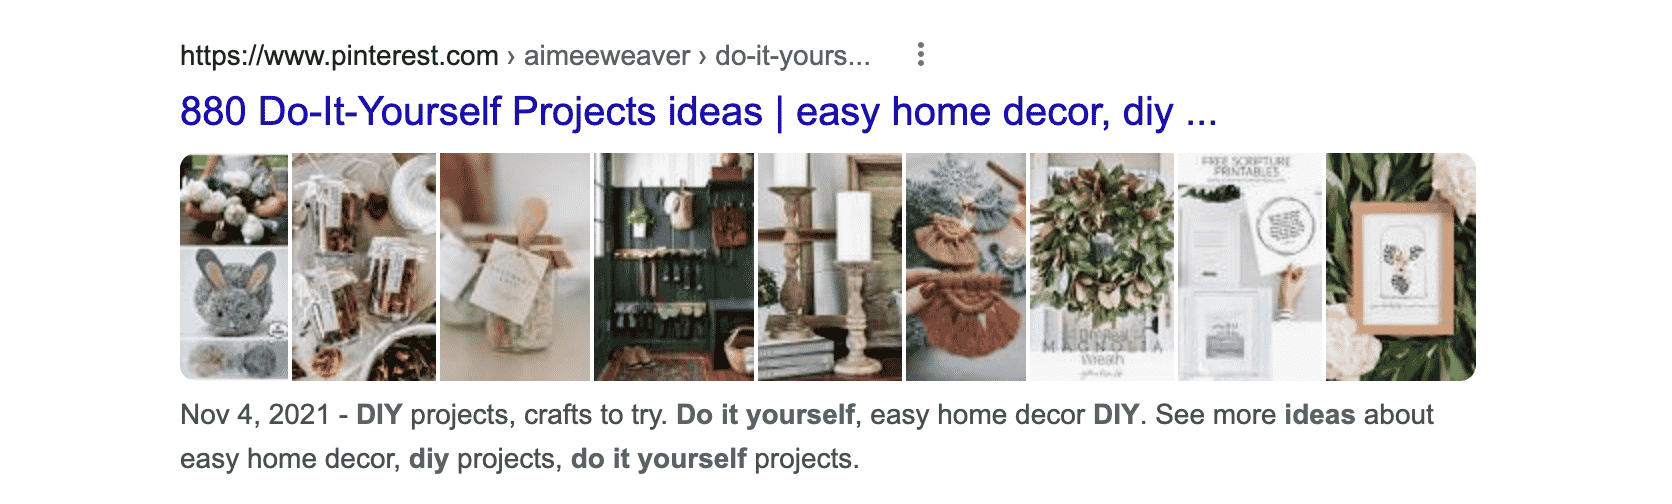 Pinterest comes #3 in Google's search results when typing "do it yourself ideas".